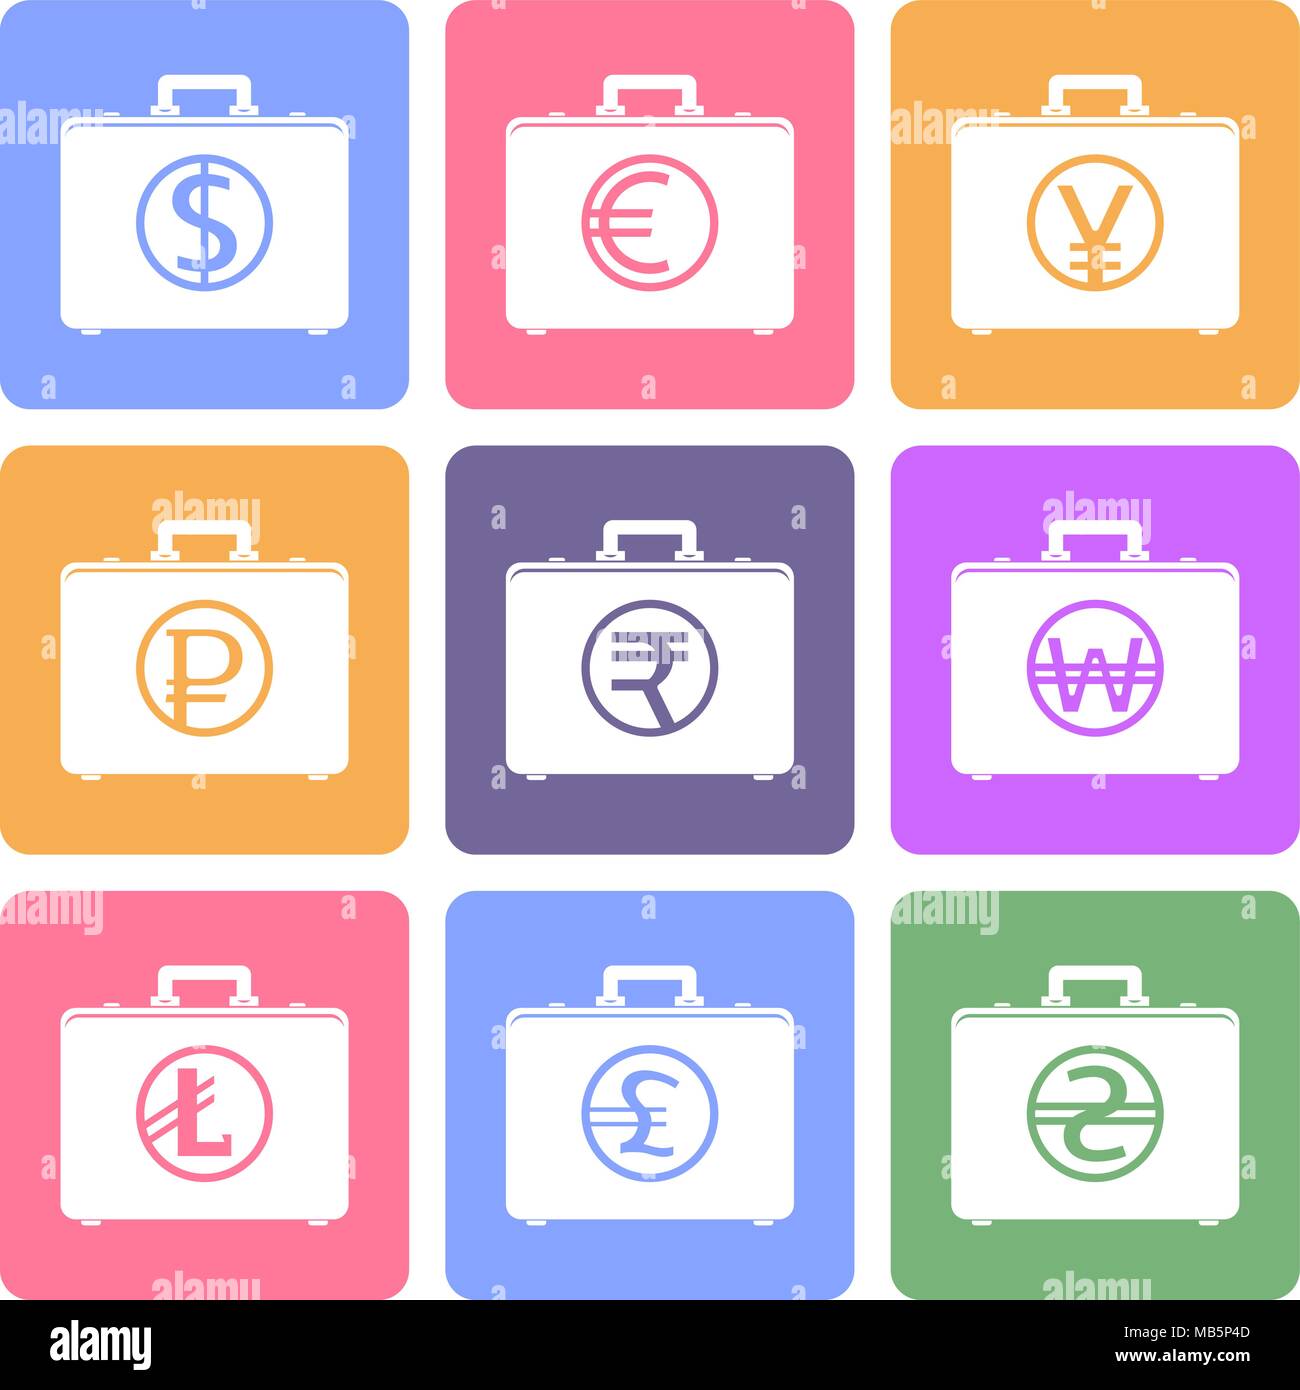 Briefcase flat icons with currency symbols Stock Vector